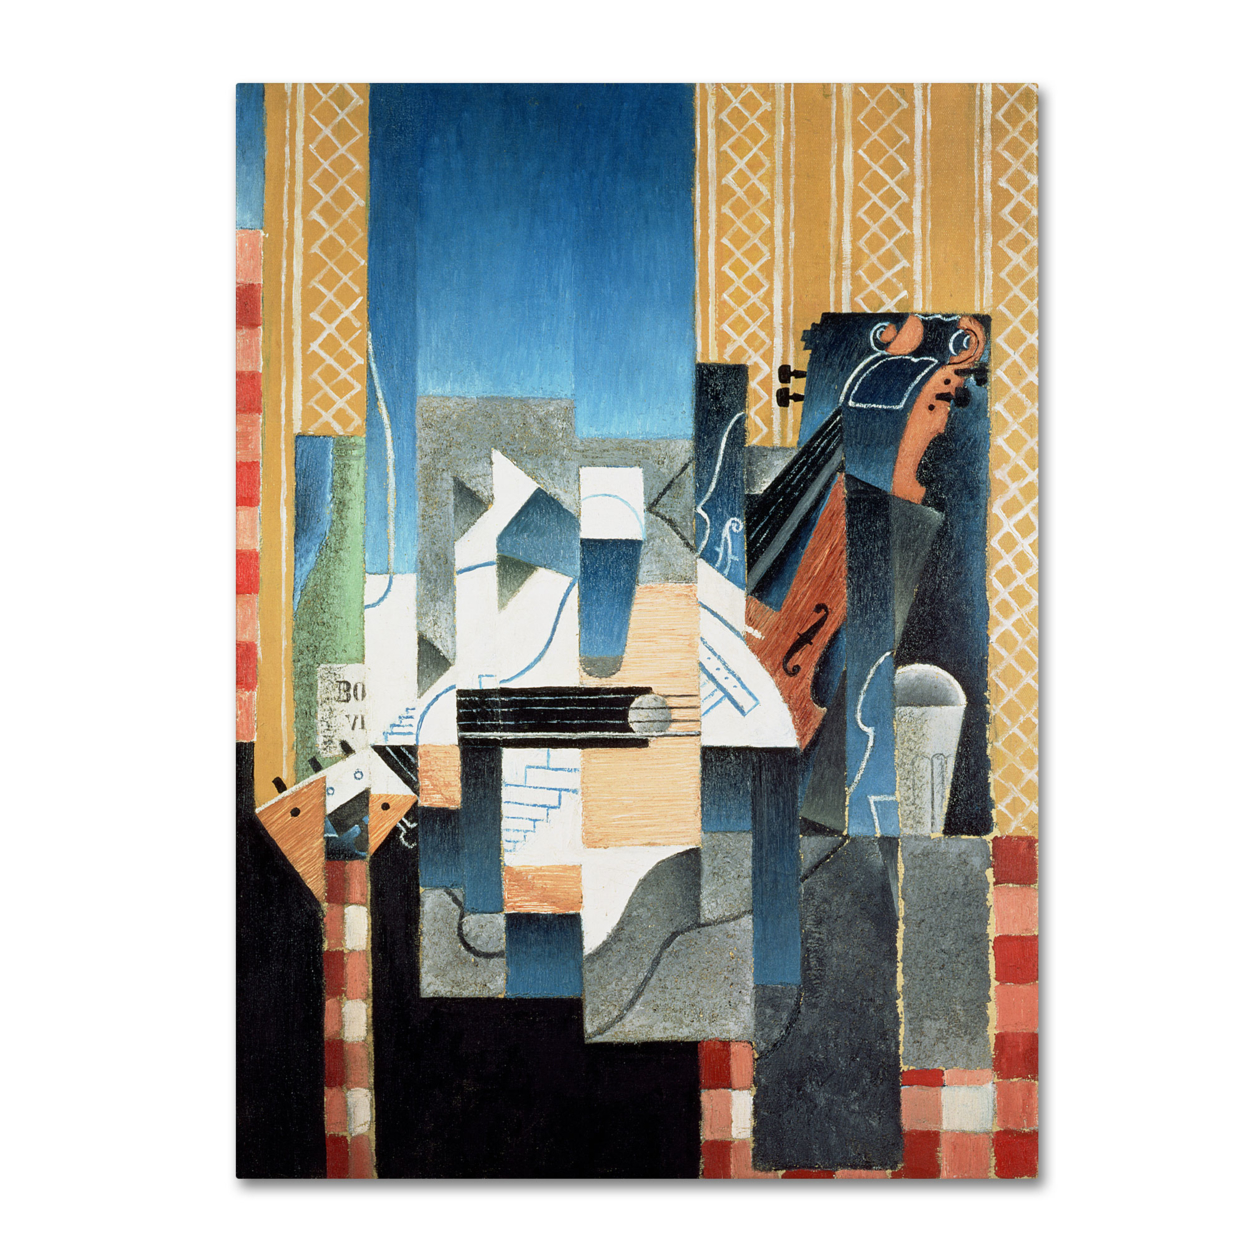 Juan Gris 'Still Life With Violin And Guitar' Canvas Wall Art 35 X 47 Inches